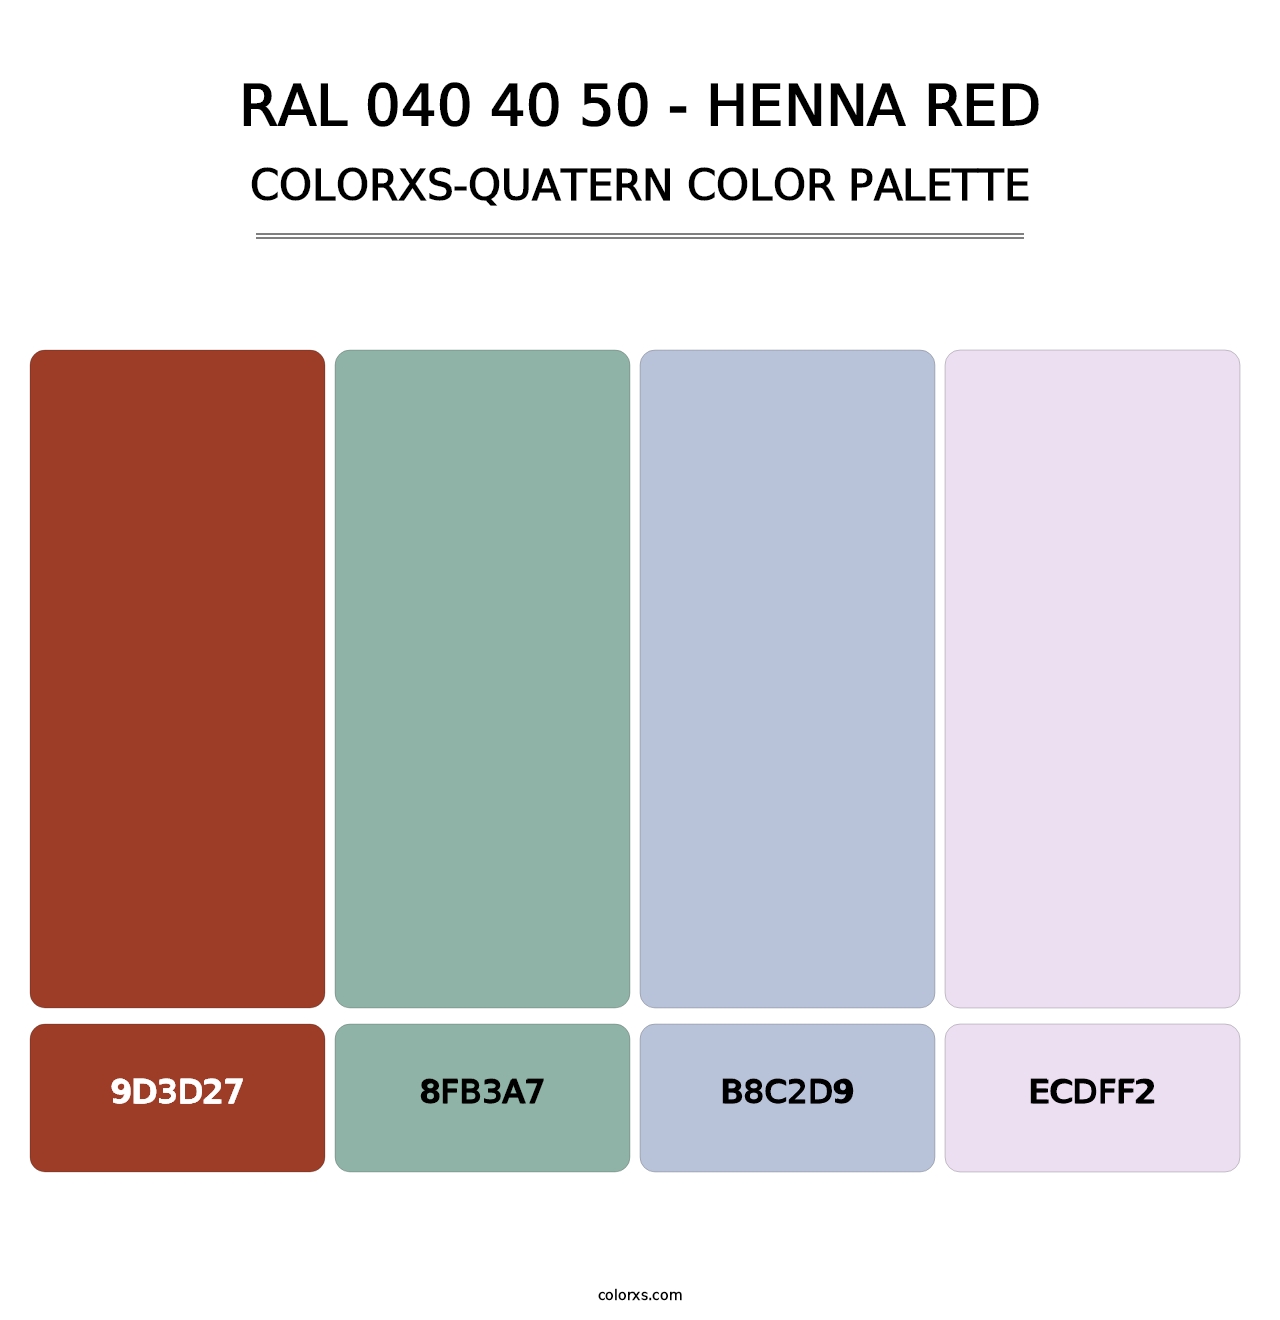 RAL 040 40 50 - Henna Red - Colorxs Quatern Palette